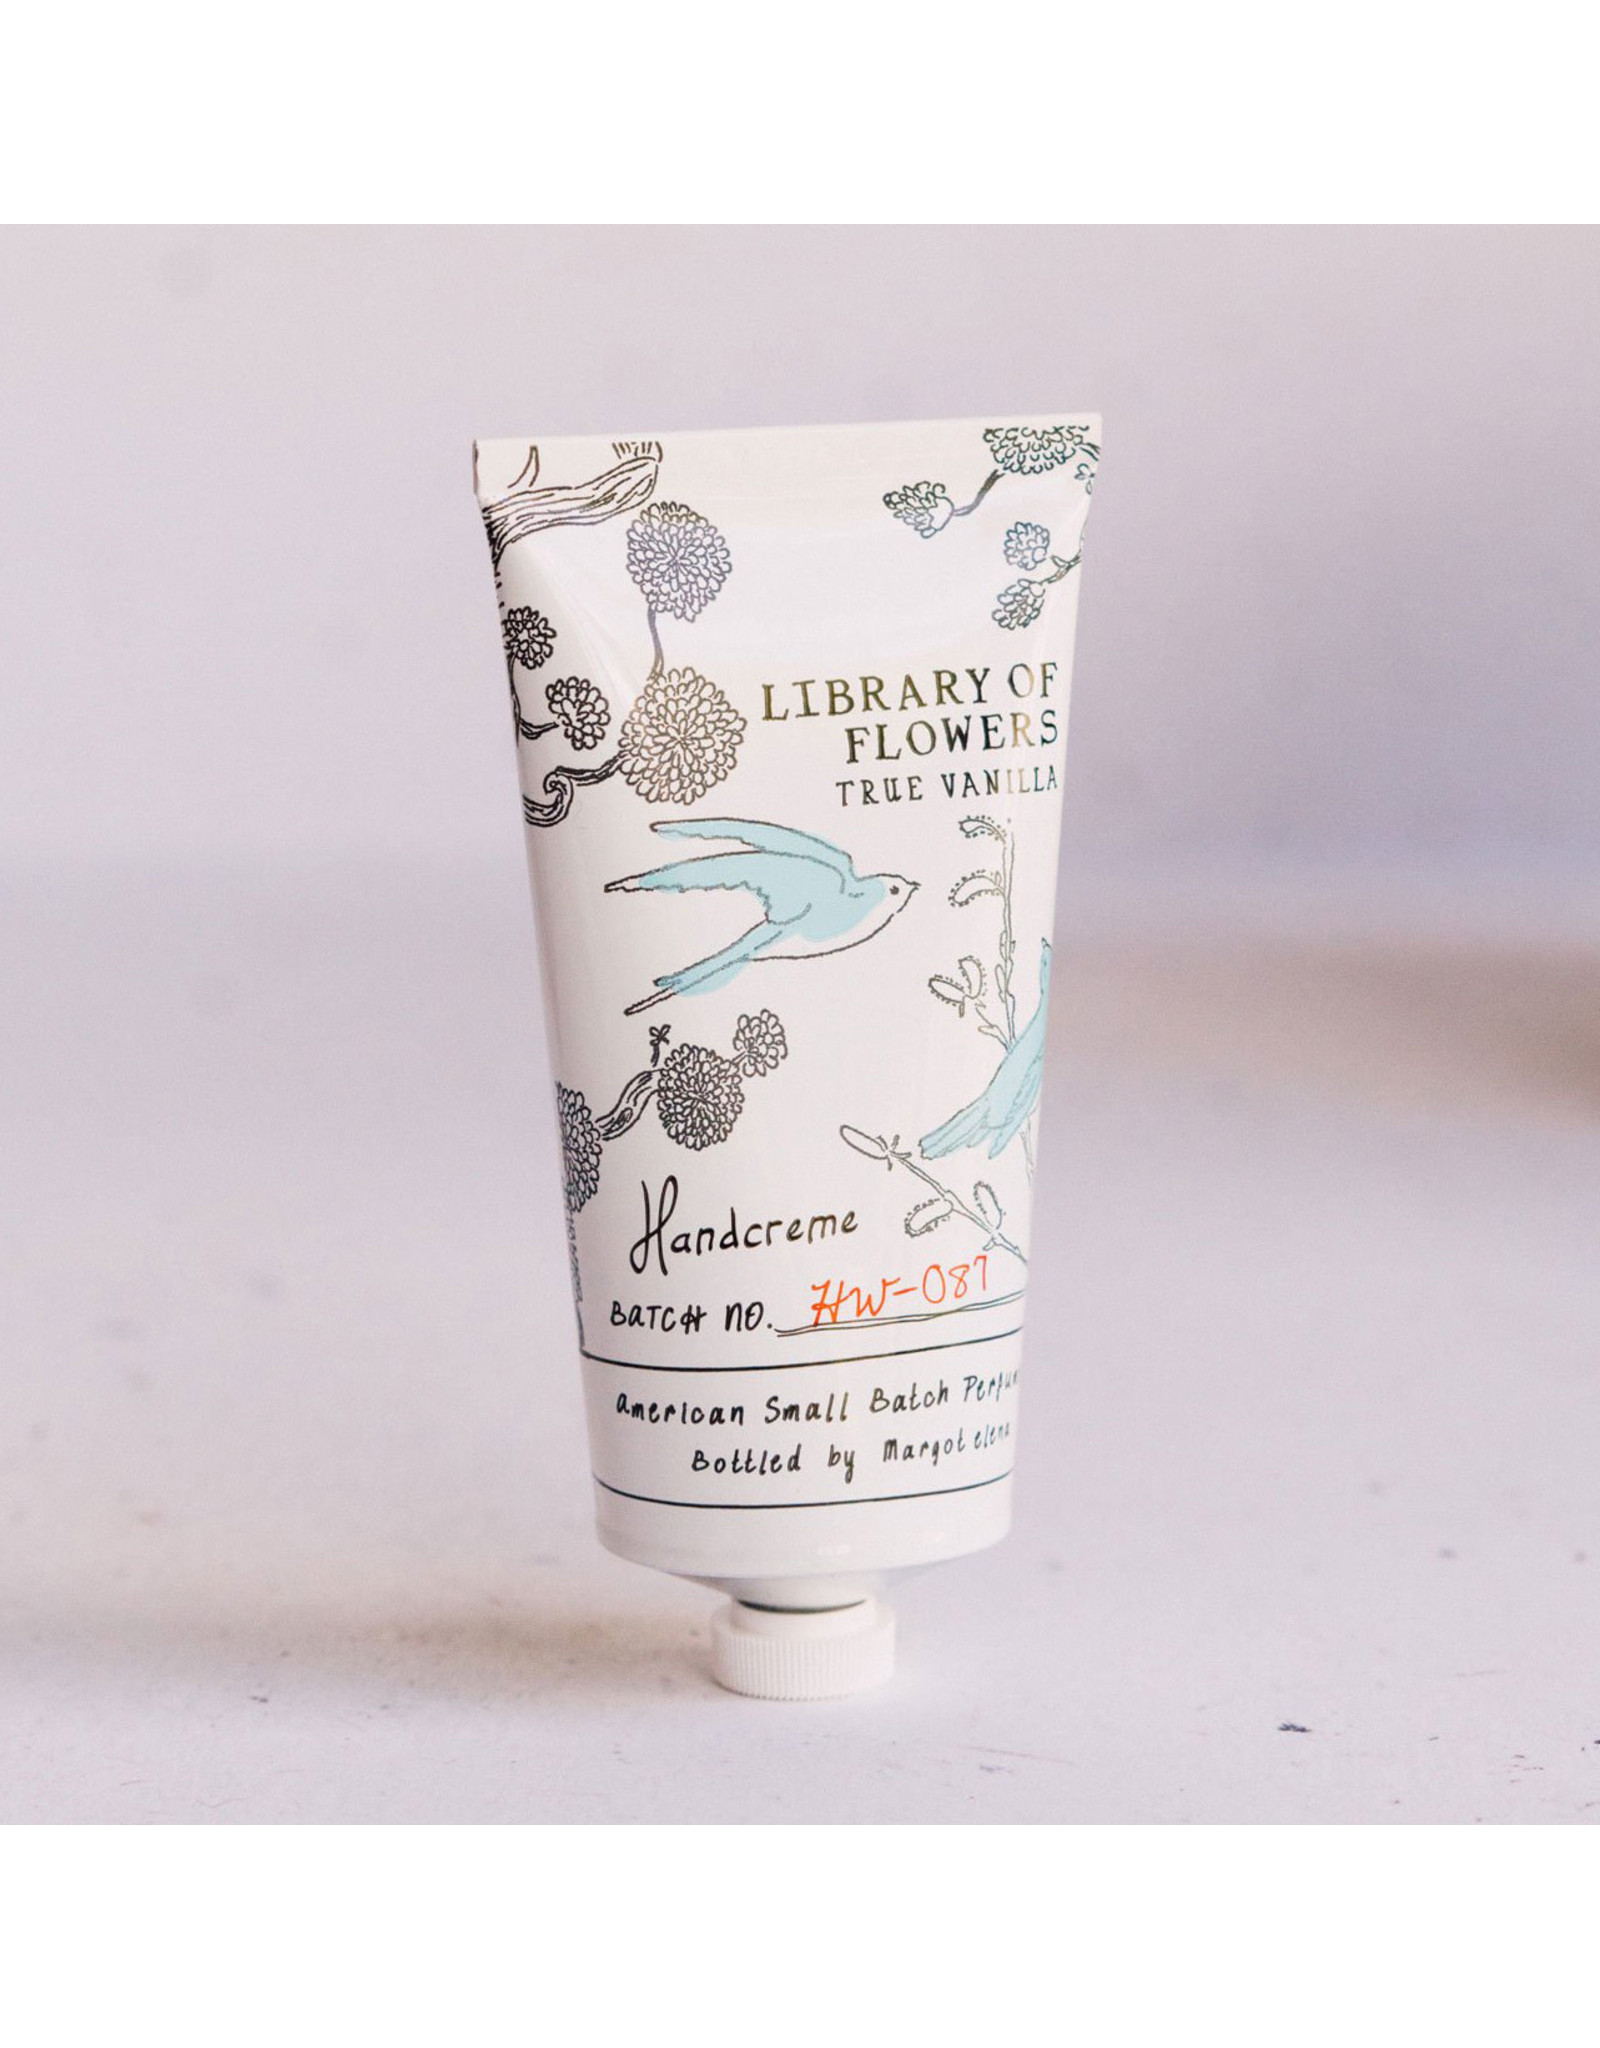 Library of Flowers True Vanilla Boxed Handcreme